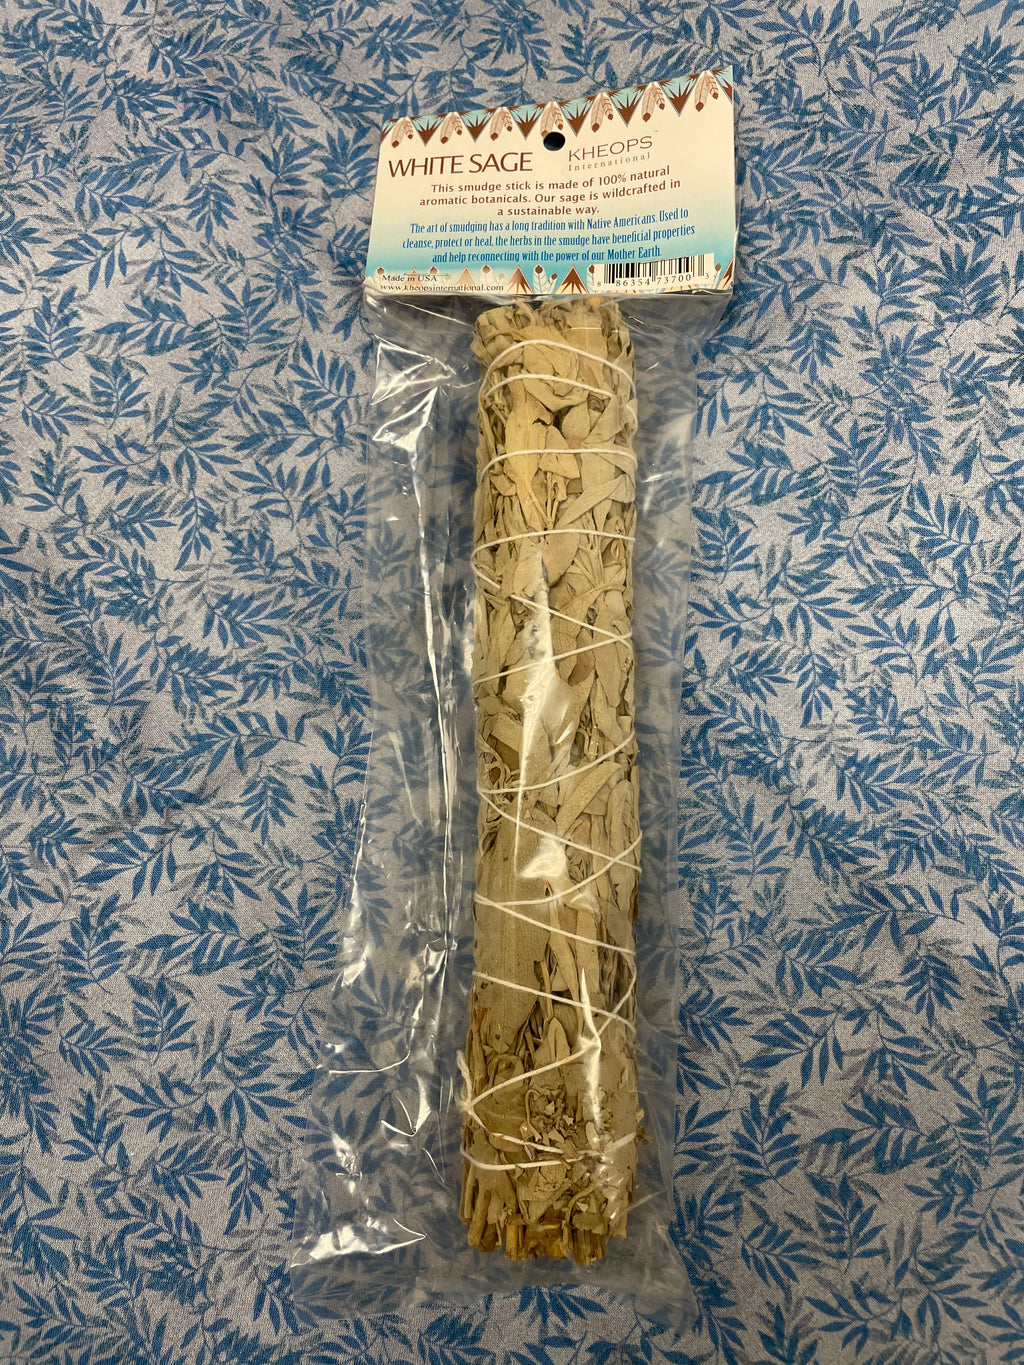 This white sage smudge stick is made of 100% natural botanicals and sustainable methods are used in wildcrafting it. Smudging with sage has its roots in Native American traditions. Use it to: *Cleanse, clear & purify your space or environment - home, office,  *Cleanse, clear or purify a person & their energy *Promote healing *Promote clarity of mind *Clear out spiritual impurities  *Enhance ceremony or ritual. Approximately 9.5"x2". Cost is $8.50.